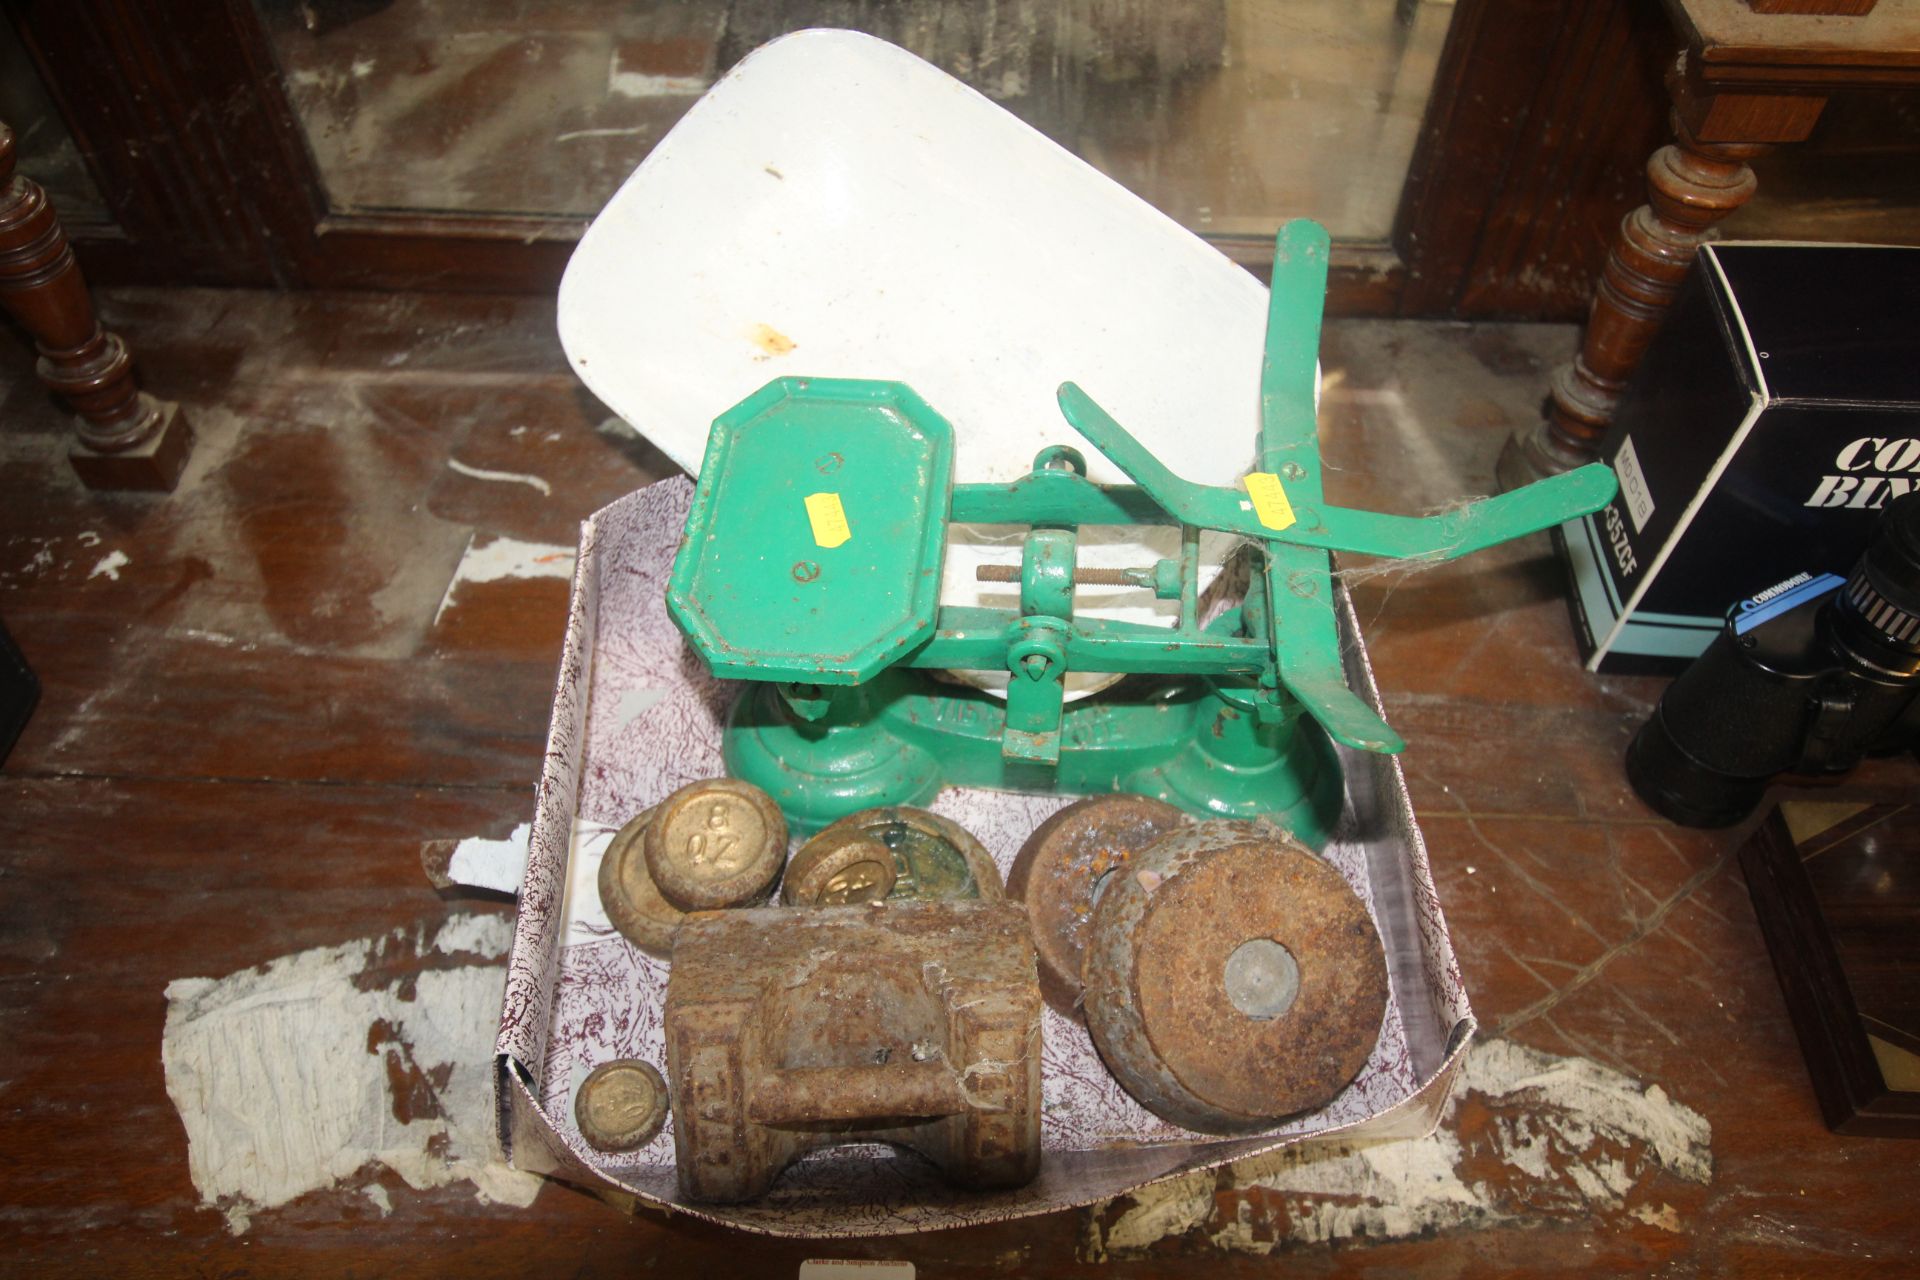 A set of scales and collection of weights